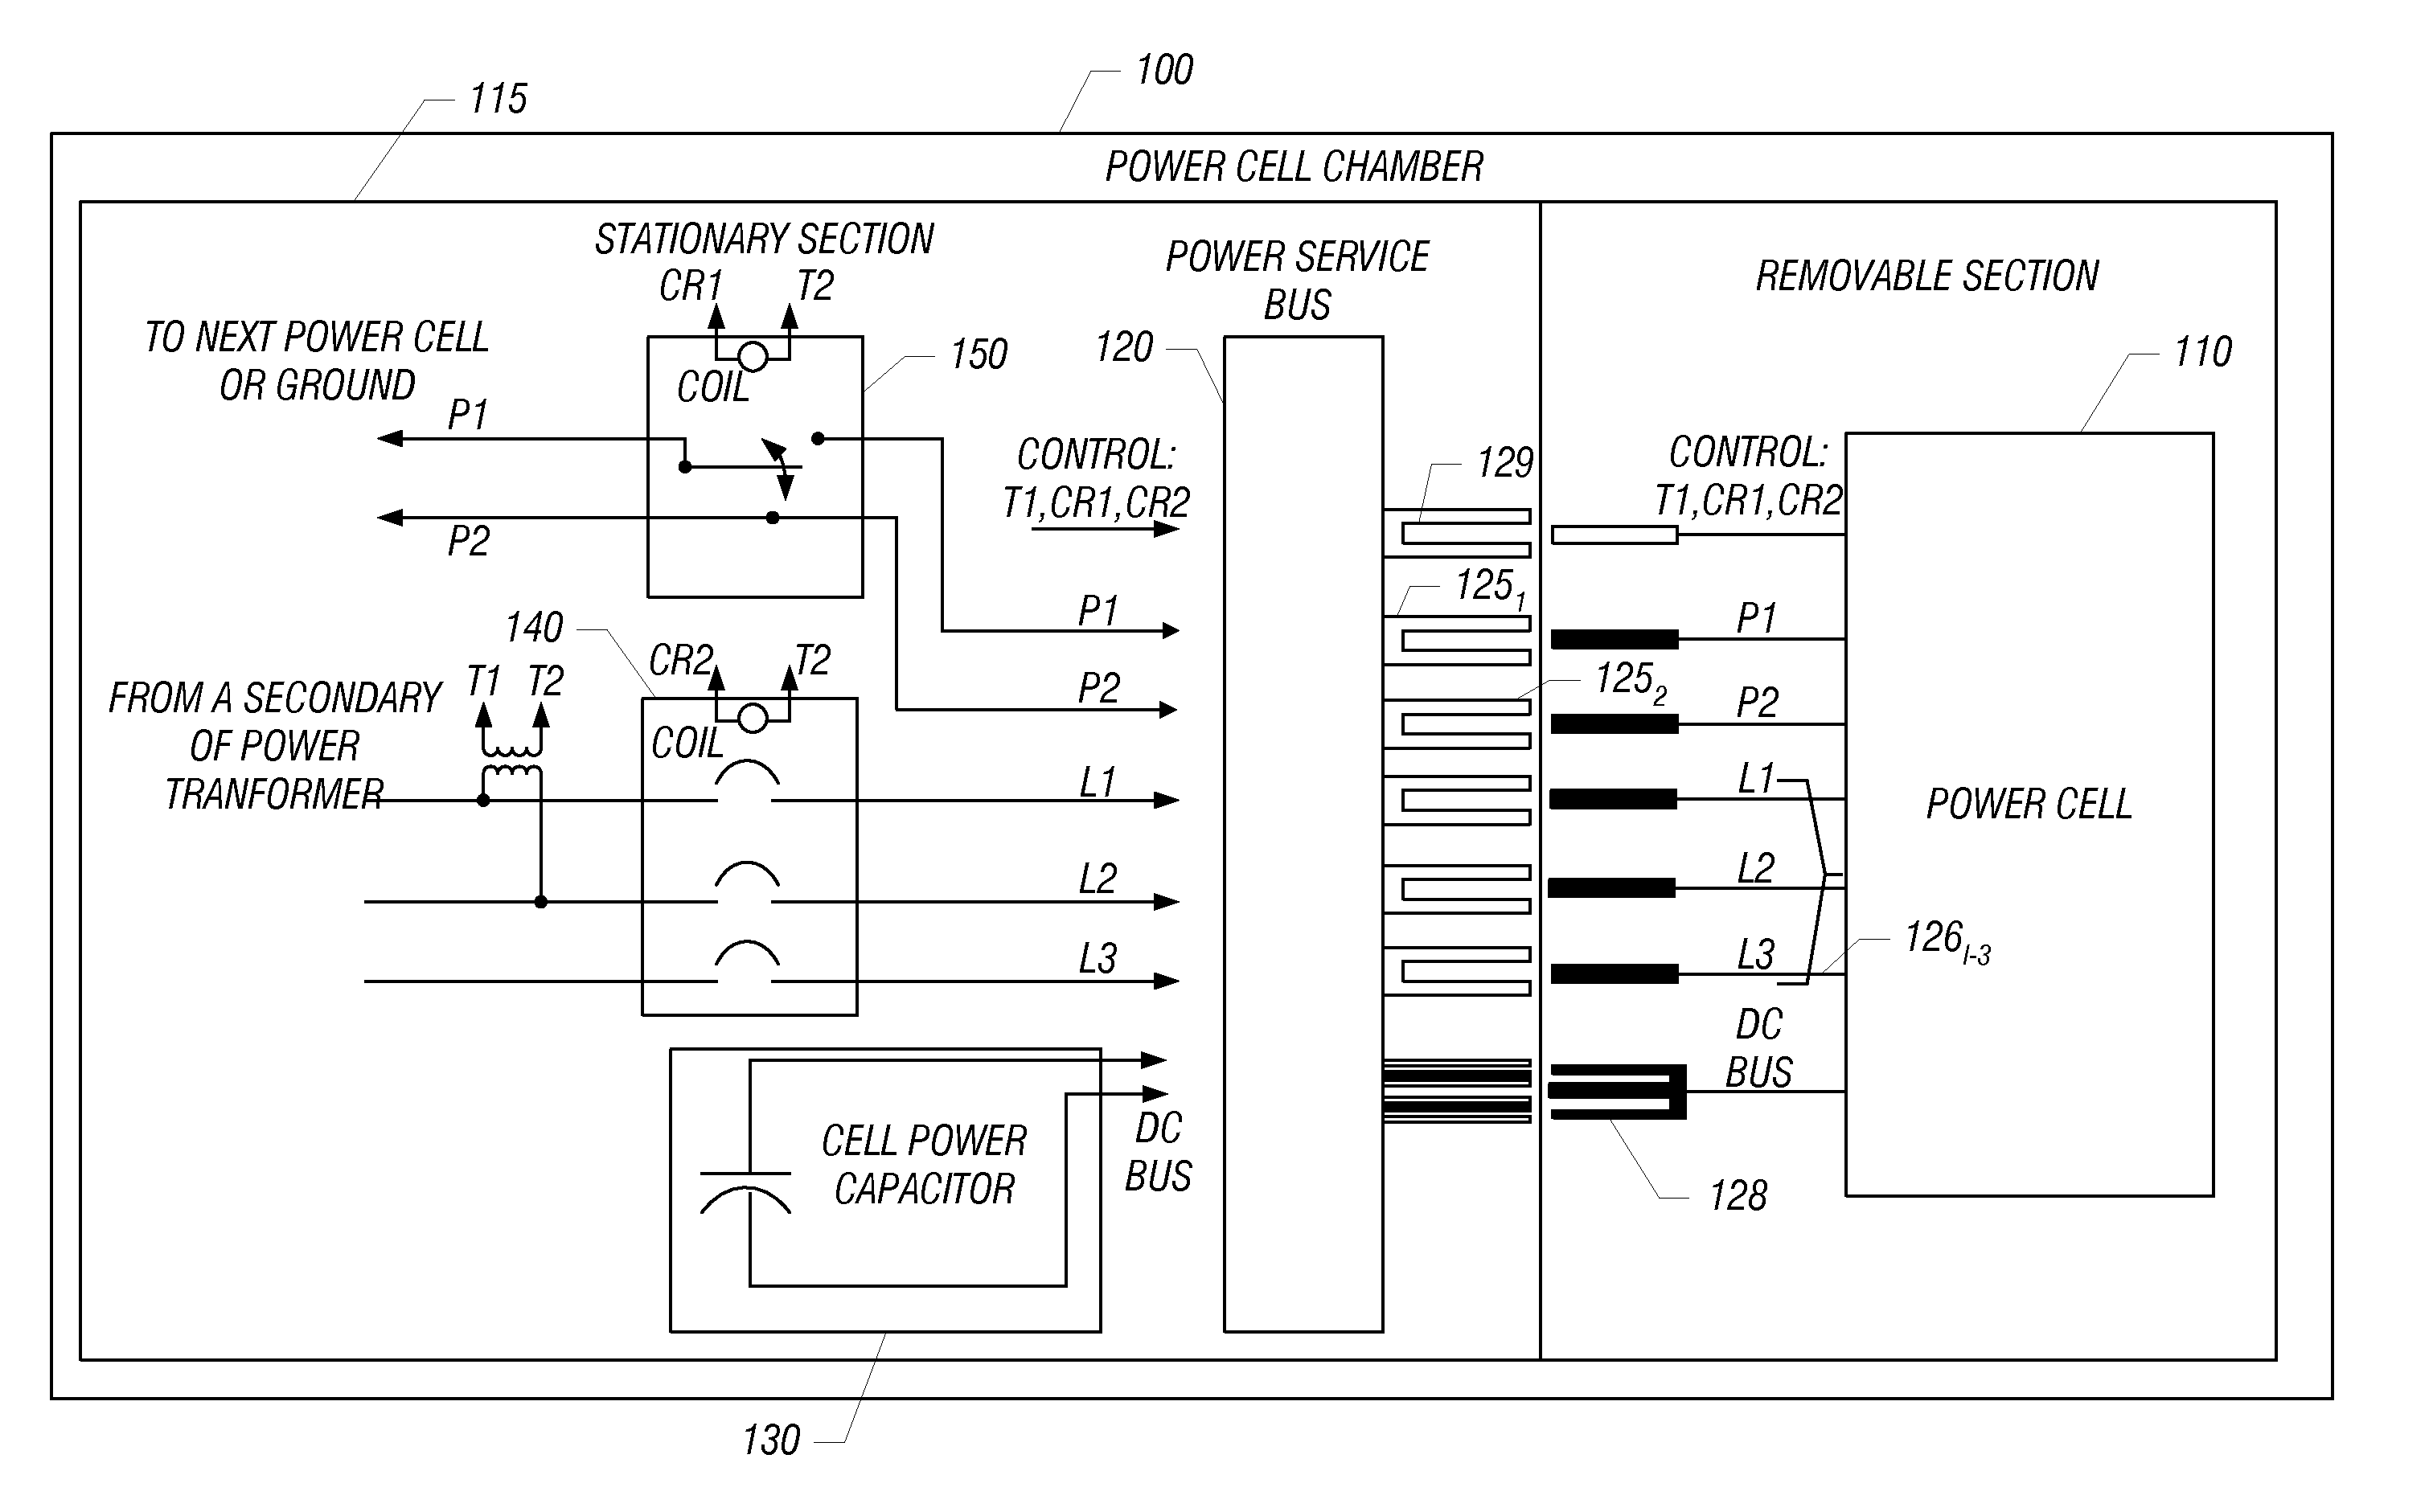 Pluggable power cell for an inverter